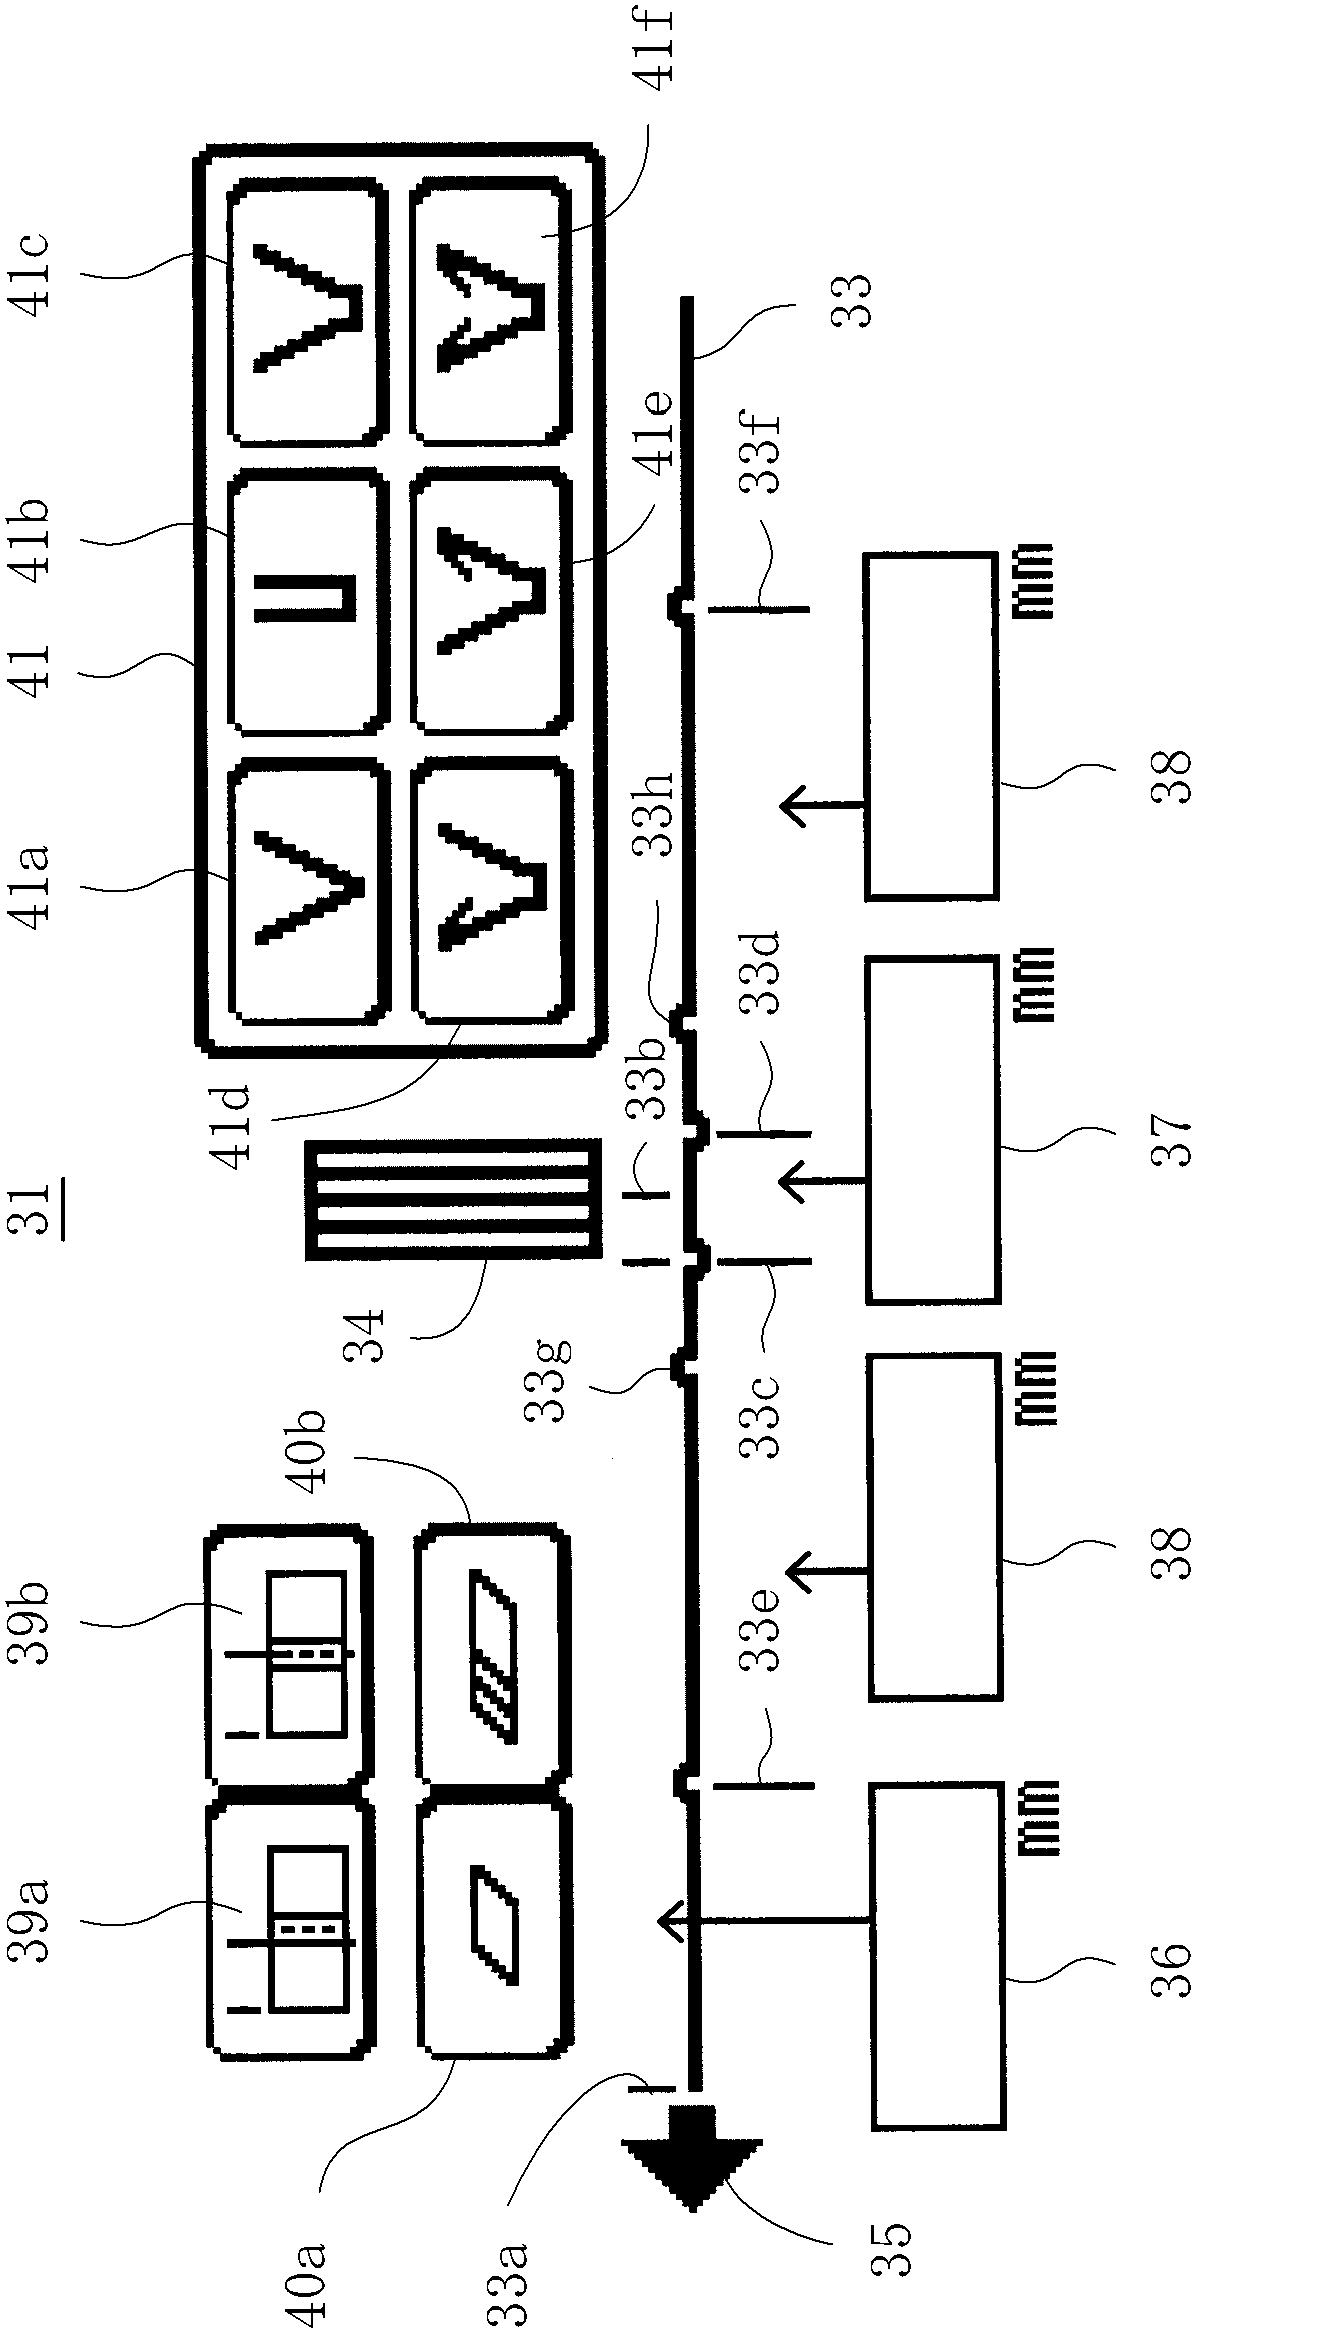 Device for applying line for folding process on front cover before attachment to main body